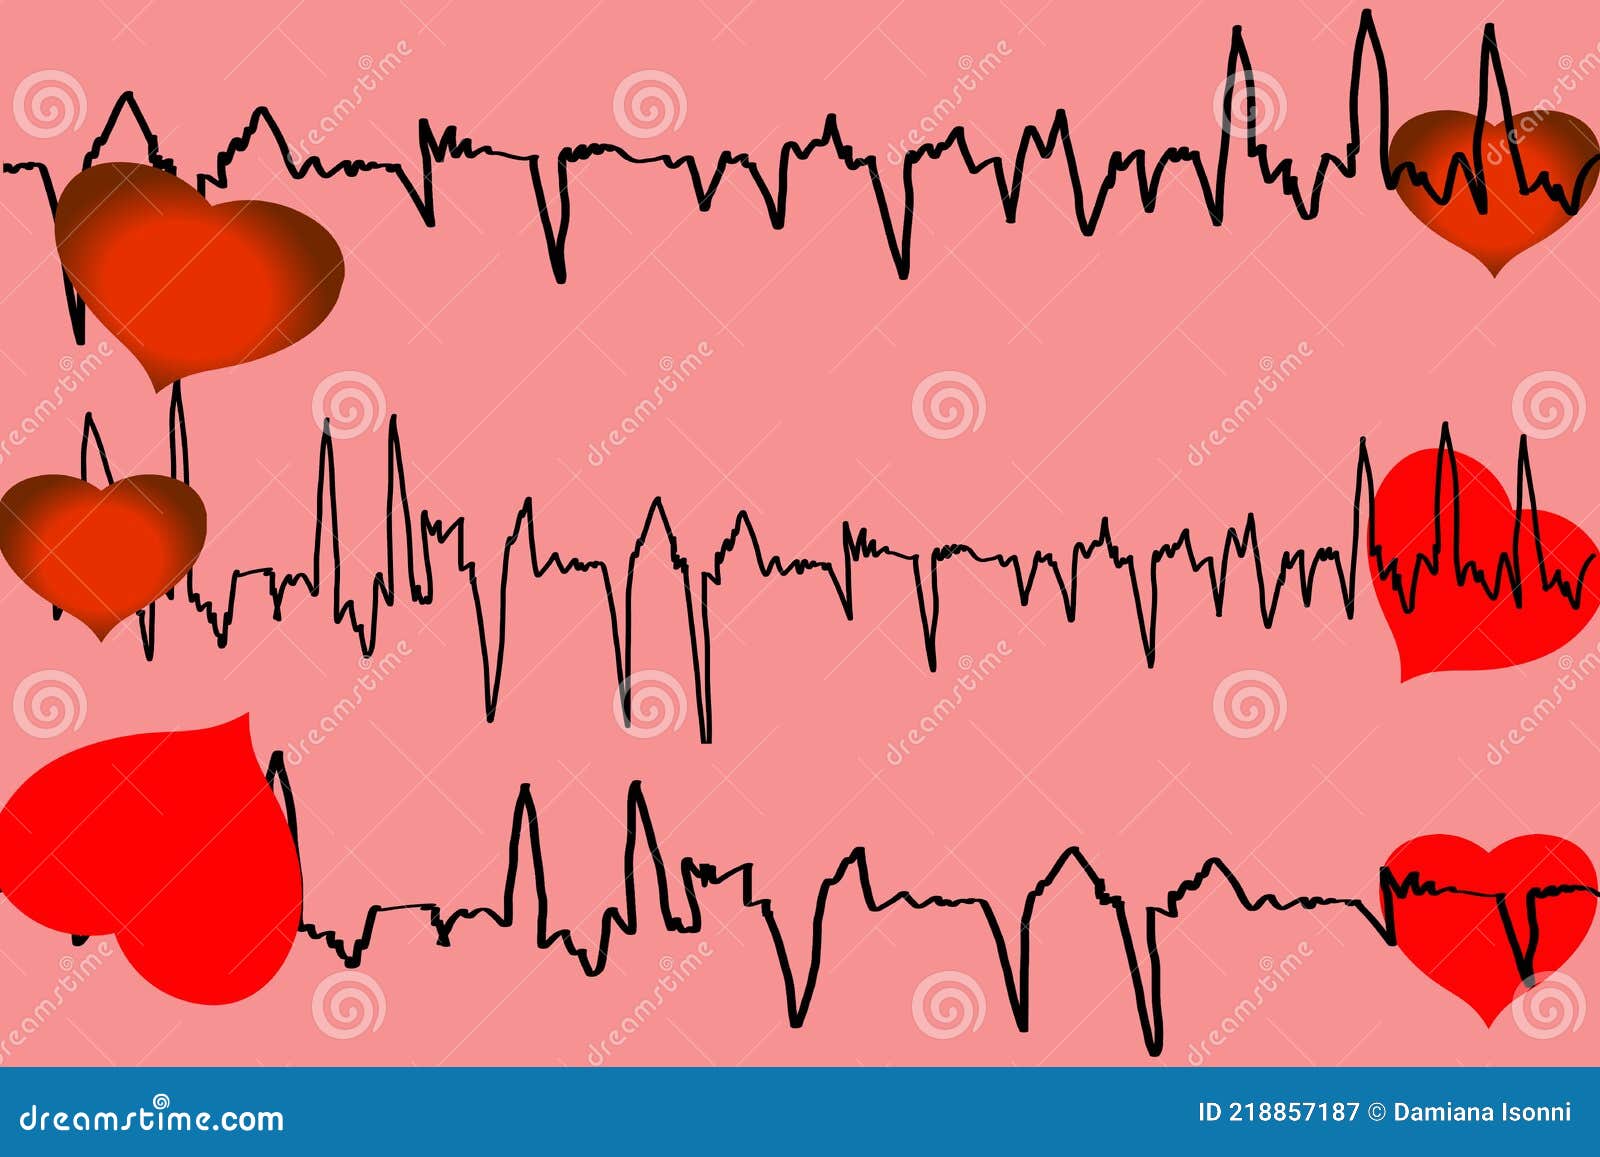 tracing of the cardiogram with heart